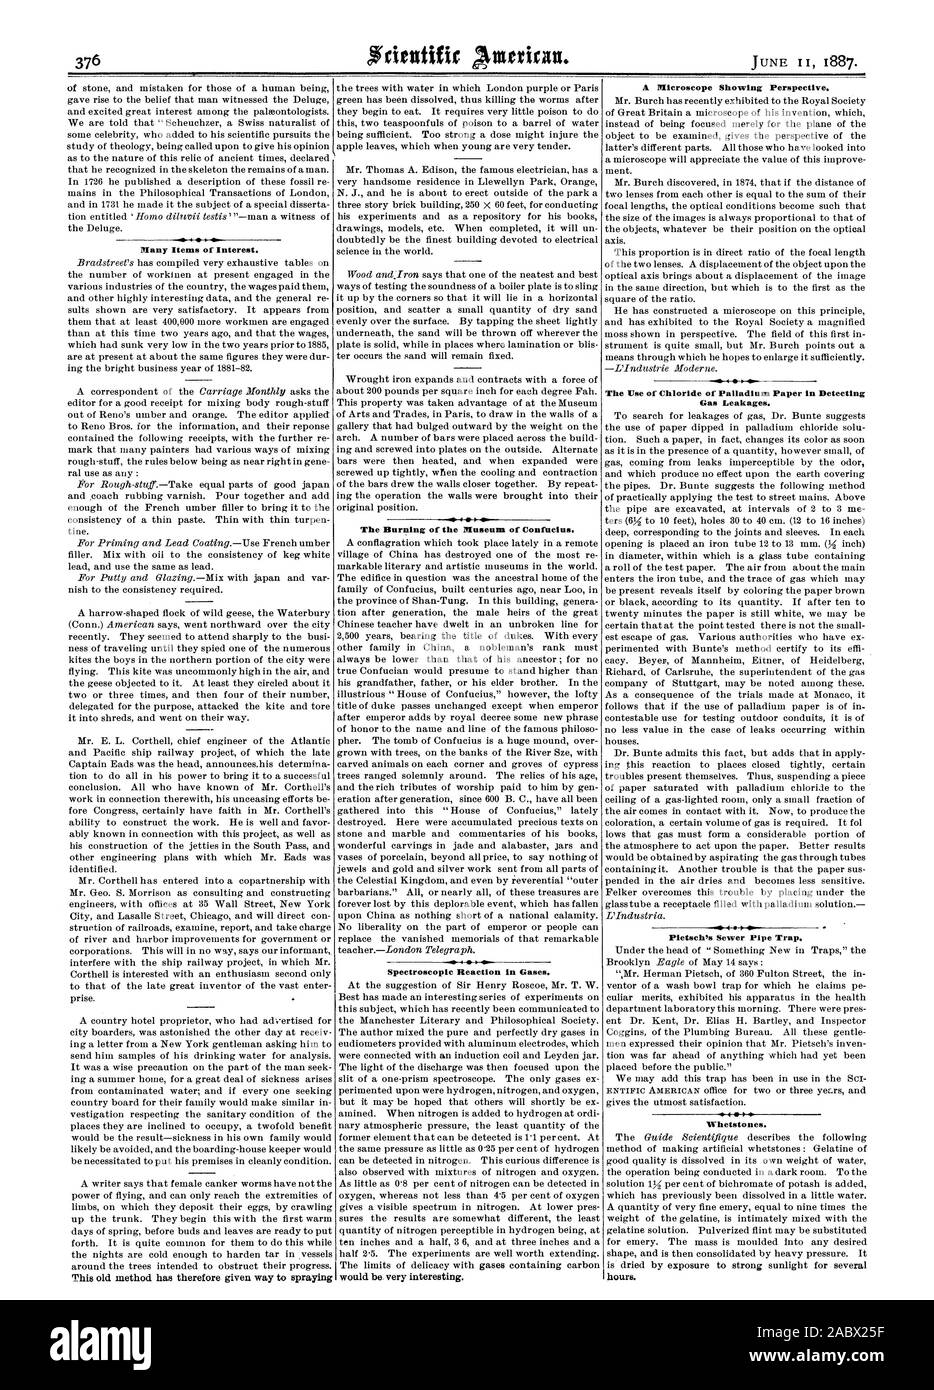 Many Items of Interest. A Microscope Showing Perspective. This old method has therefore given way to spraying The Burning of the Museum of Confucius. Spectroscopic Reaction in Gases. would be very interesting. The Use of Chloride of Palladium Paper in Detecting Gas Leakages. 4  4  4. Whetstones. hours., scientific american, 1887-06-11 Stock Photo